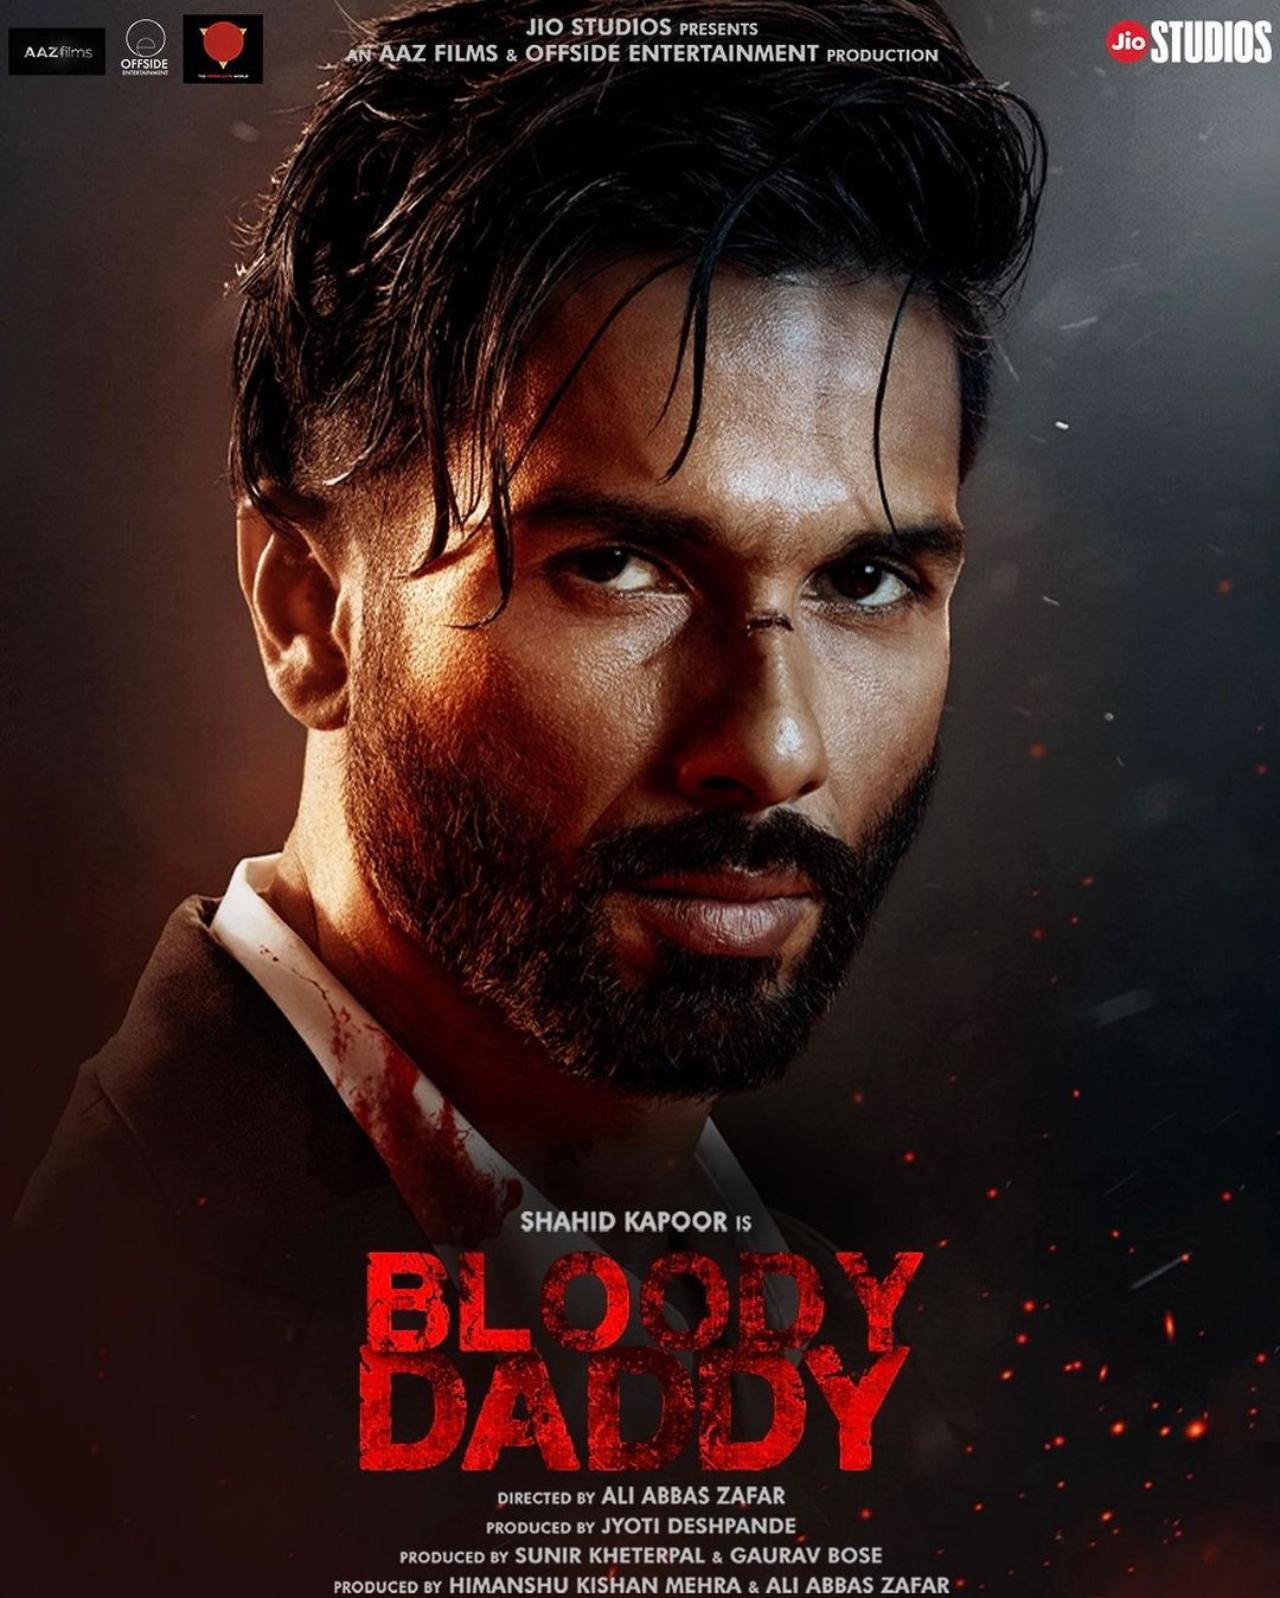 Bloody Daddy (June 9, 2023)
Shahid Kapoor's highly anticipated action film 'Bloody Daddy' features the actor in an action hero role that has never been seen before. The film also includes Sanjay Kapoor, Ronit Roy, and Diana Penty in important roles. 'Bloody Daddy' will stream on June 9, 2023, exclusively on Jio Cinemas.